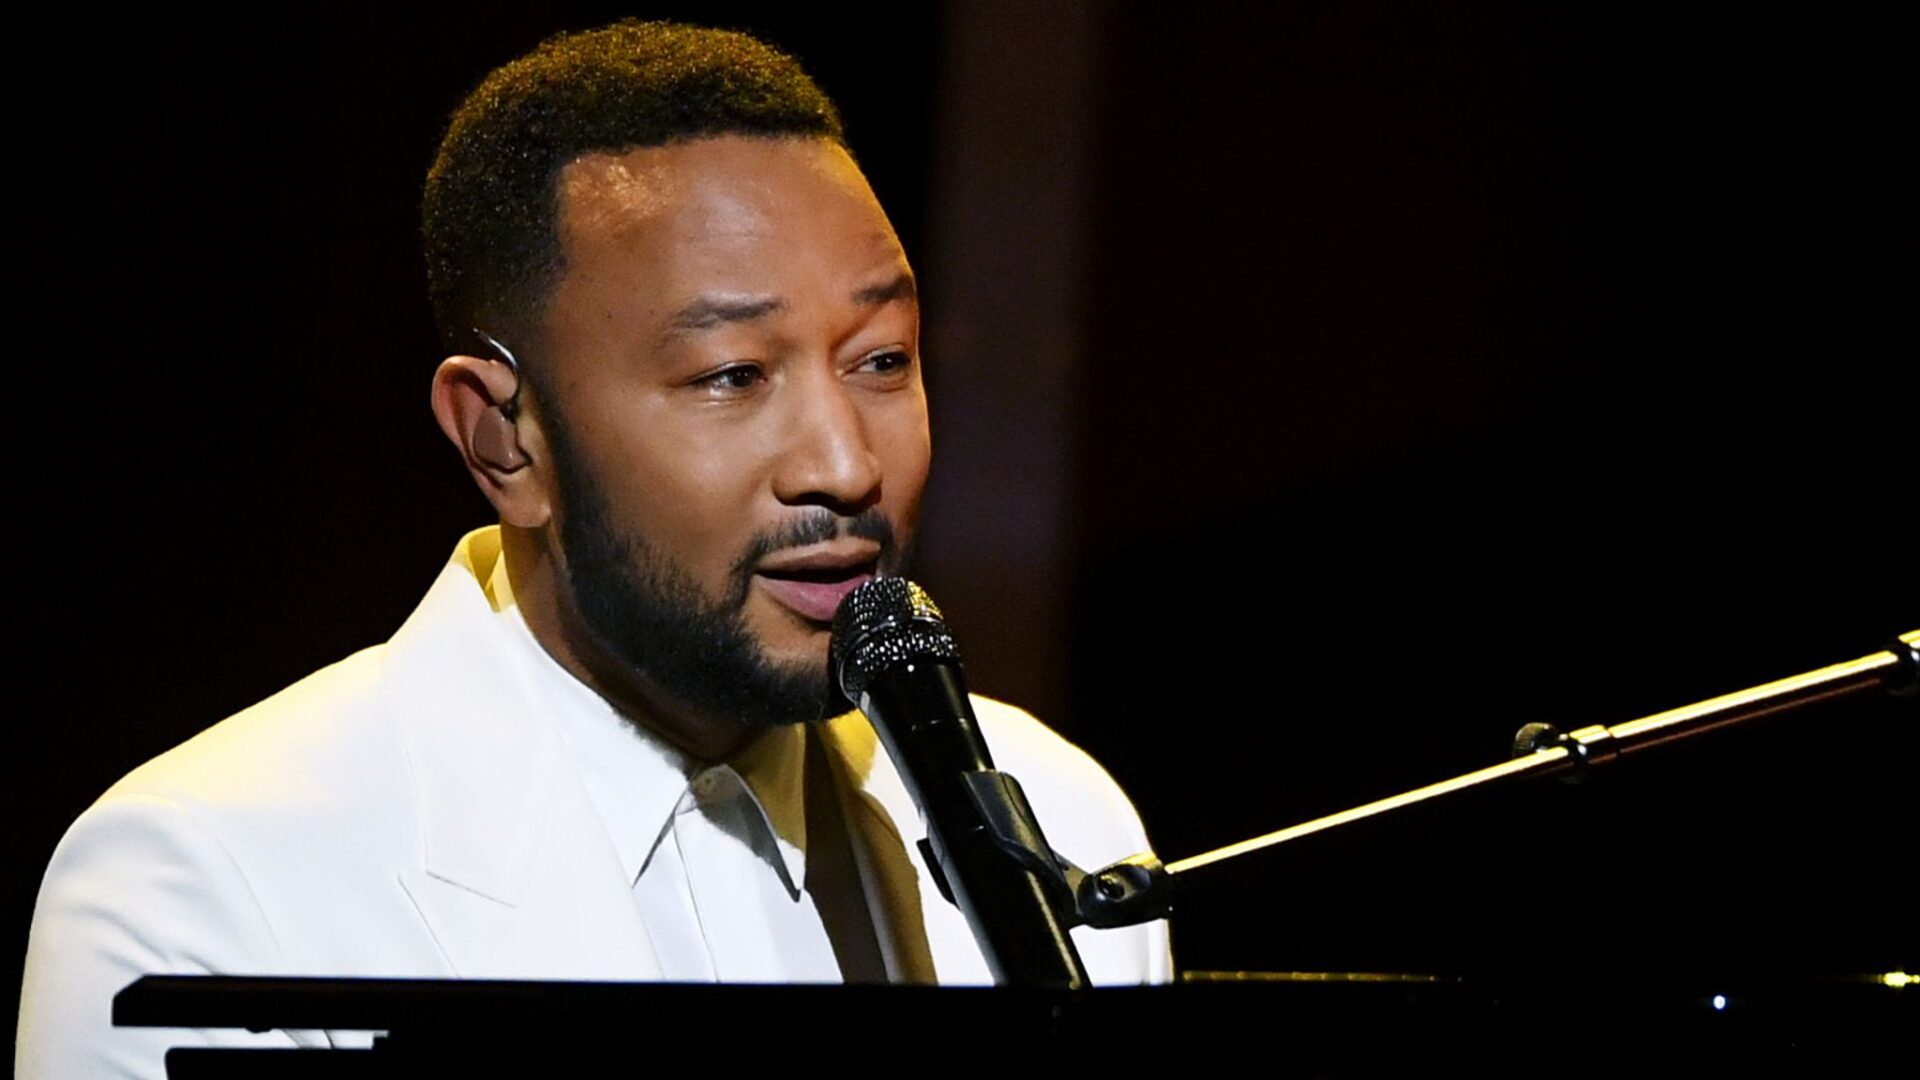 John Legend Announces Ticket Details For His One-Off Royal Albert Hall Show, Yours Truly, News, March 28, 2023